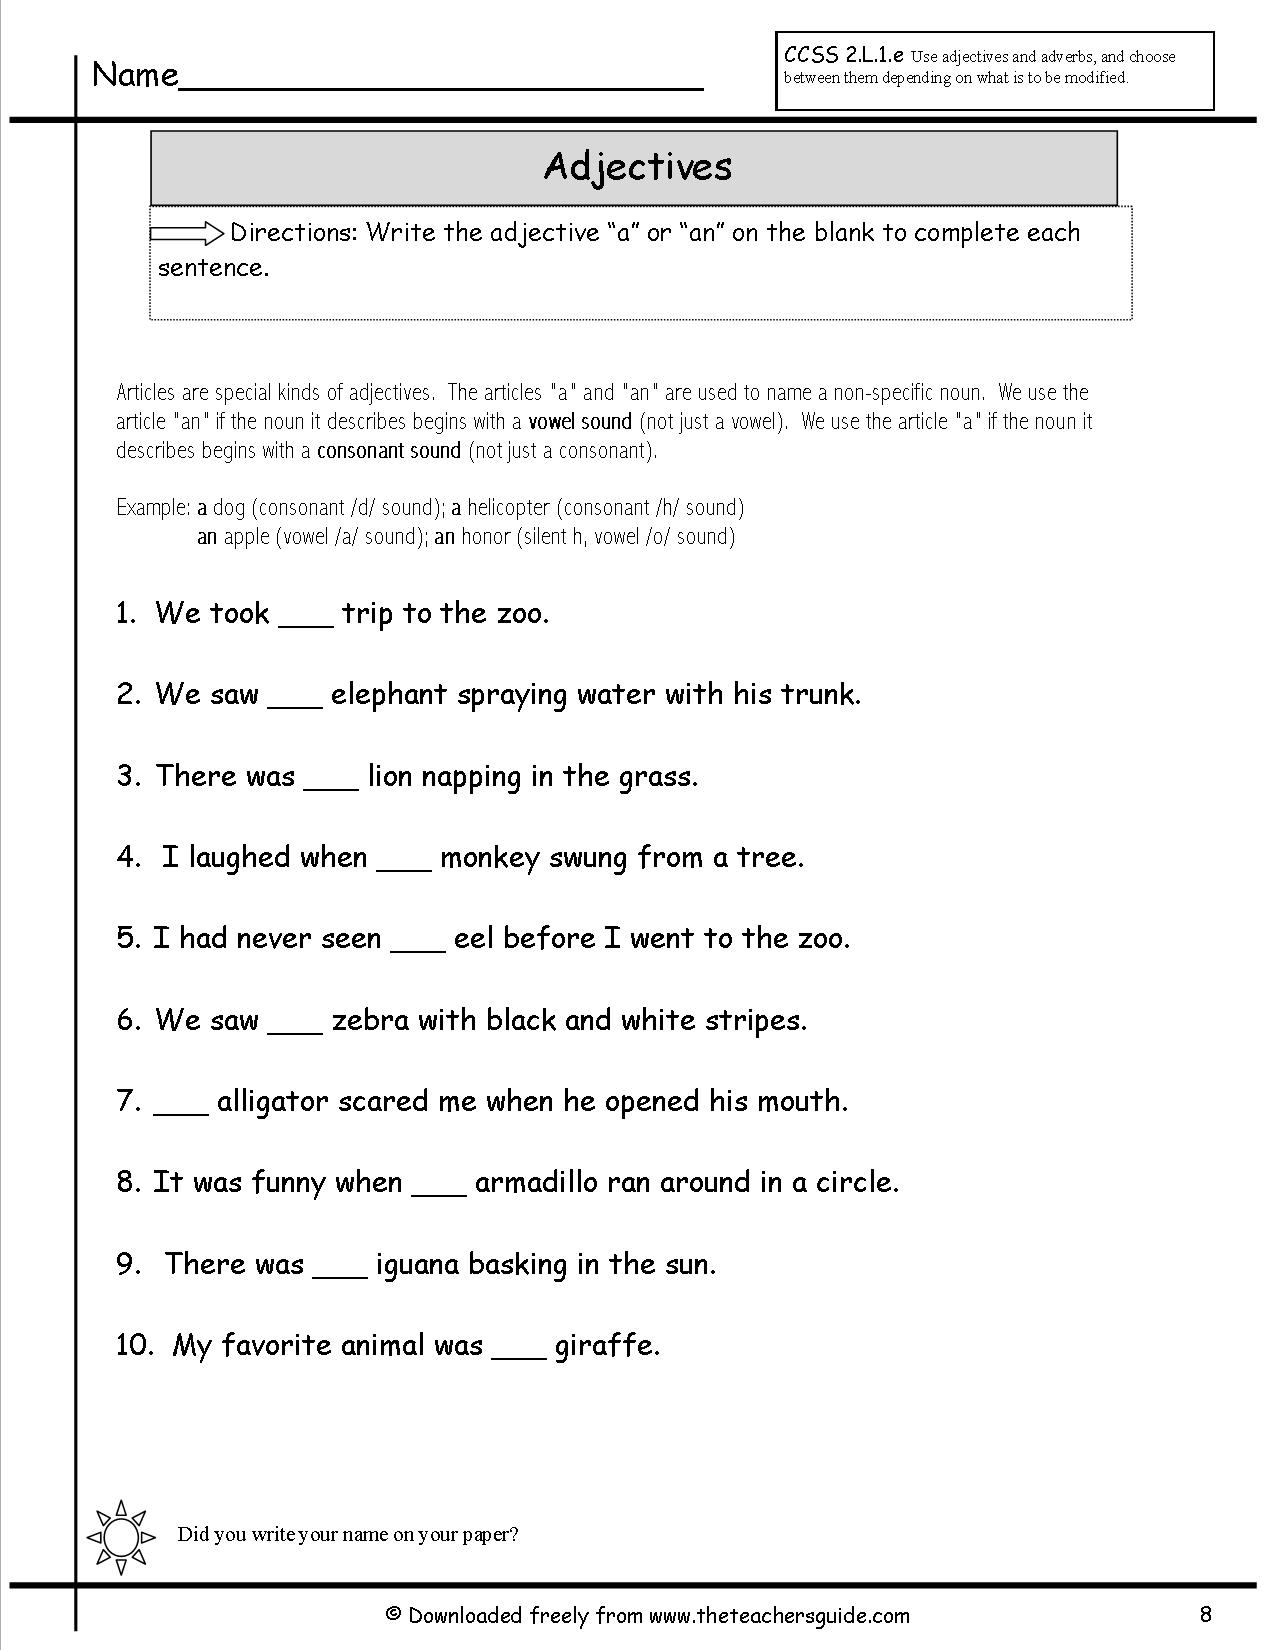 15 Best Images Of Nouns And Adjectives Worksheets Identifying Nouns Verbs Adjectives